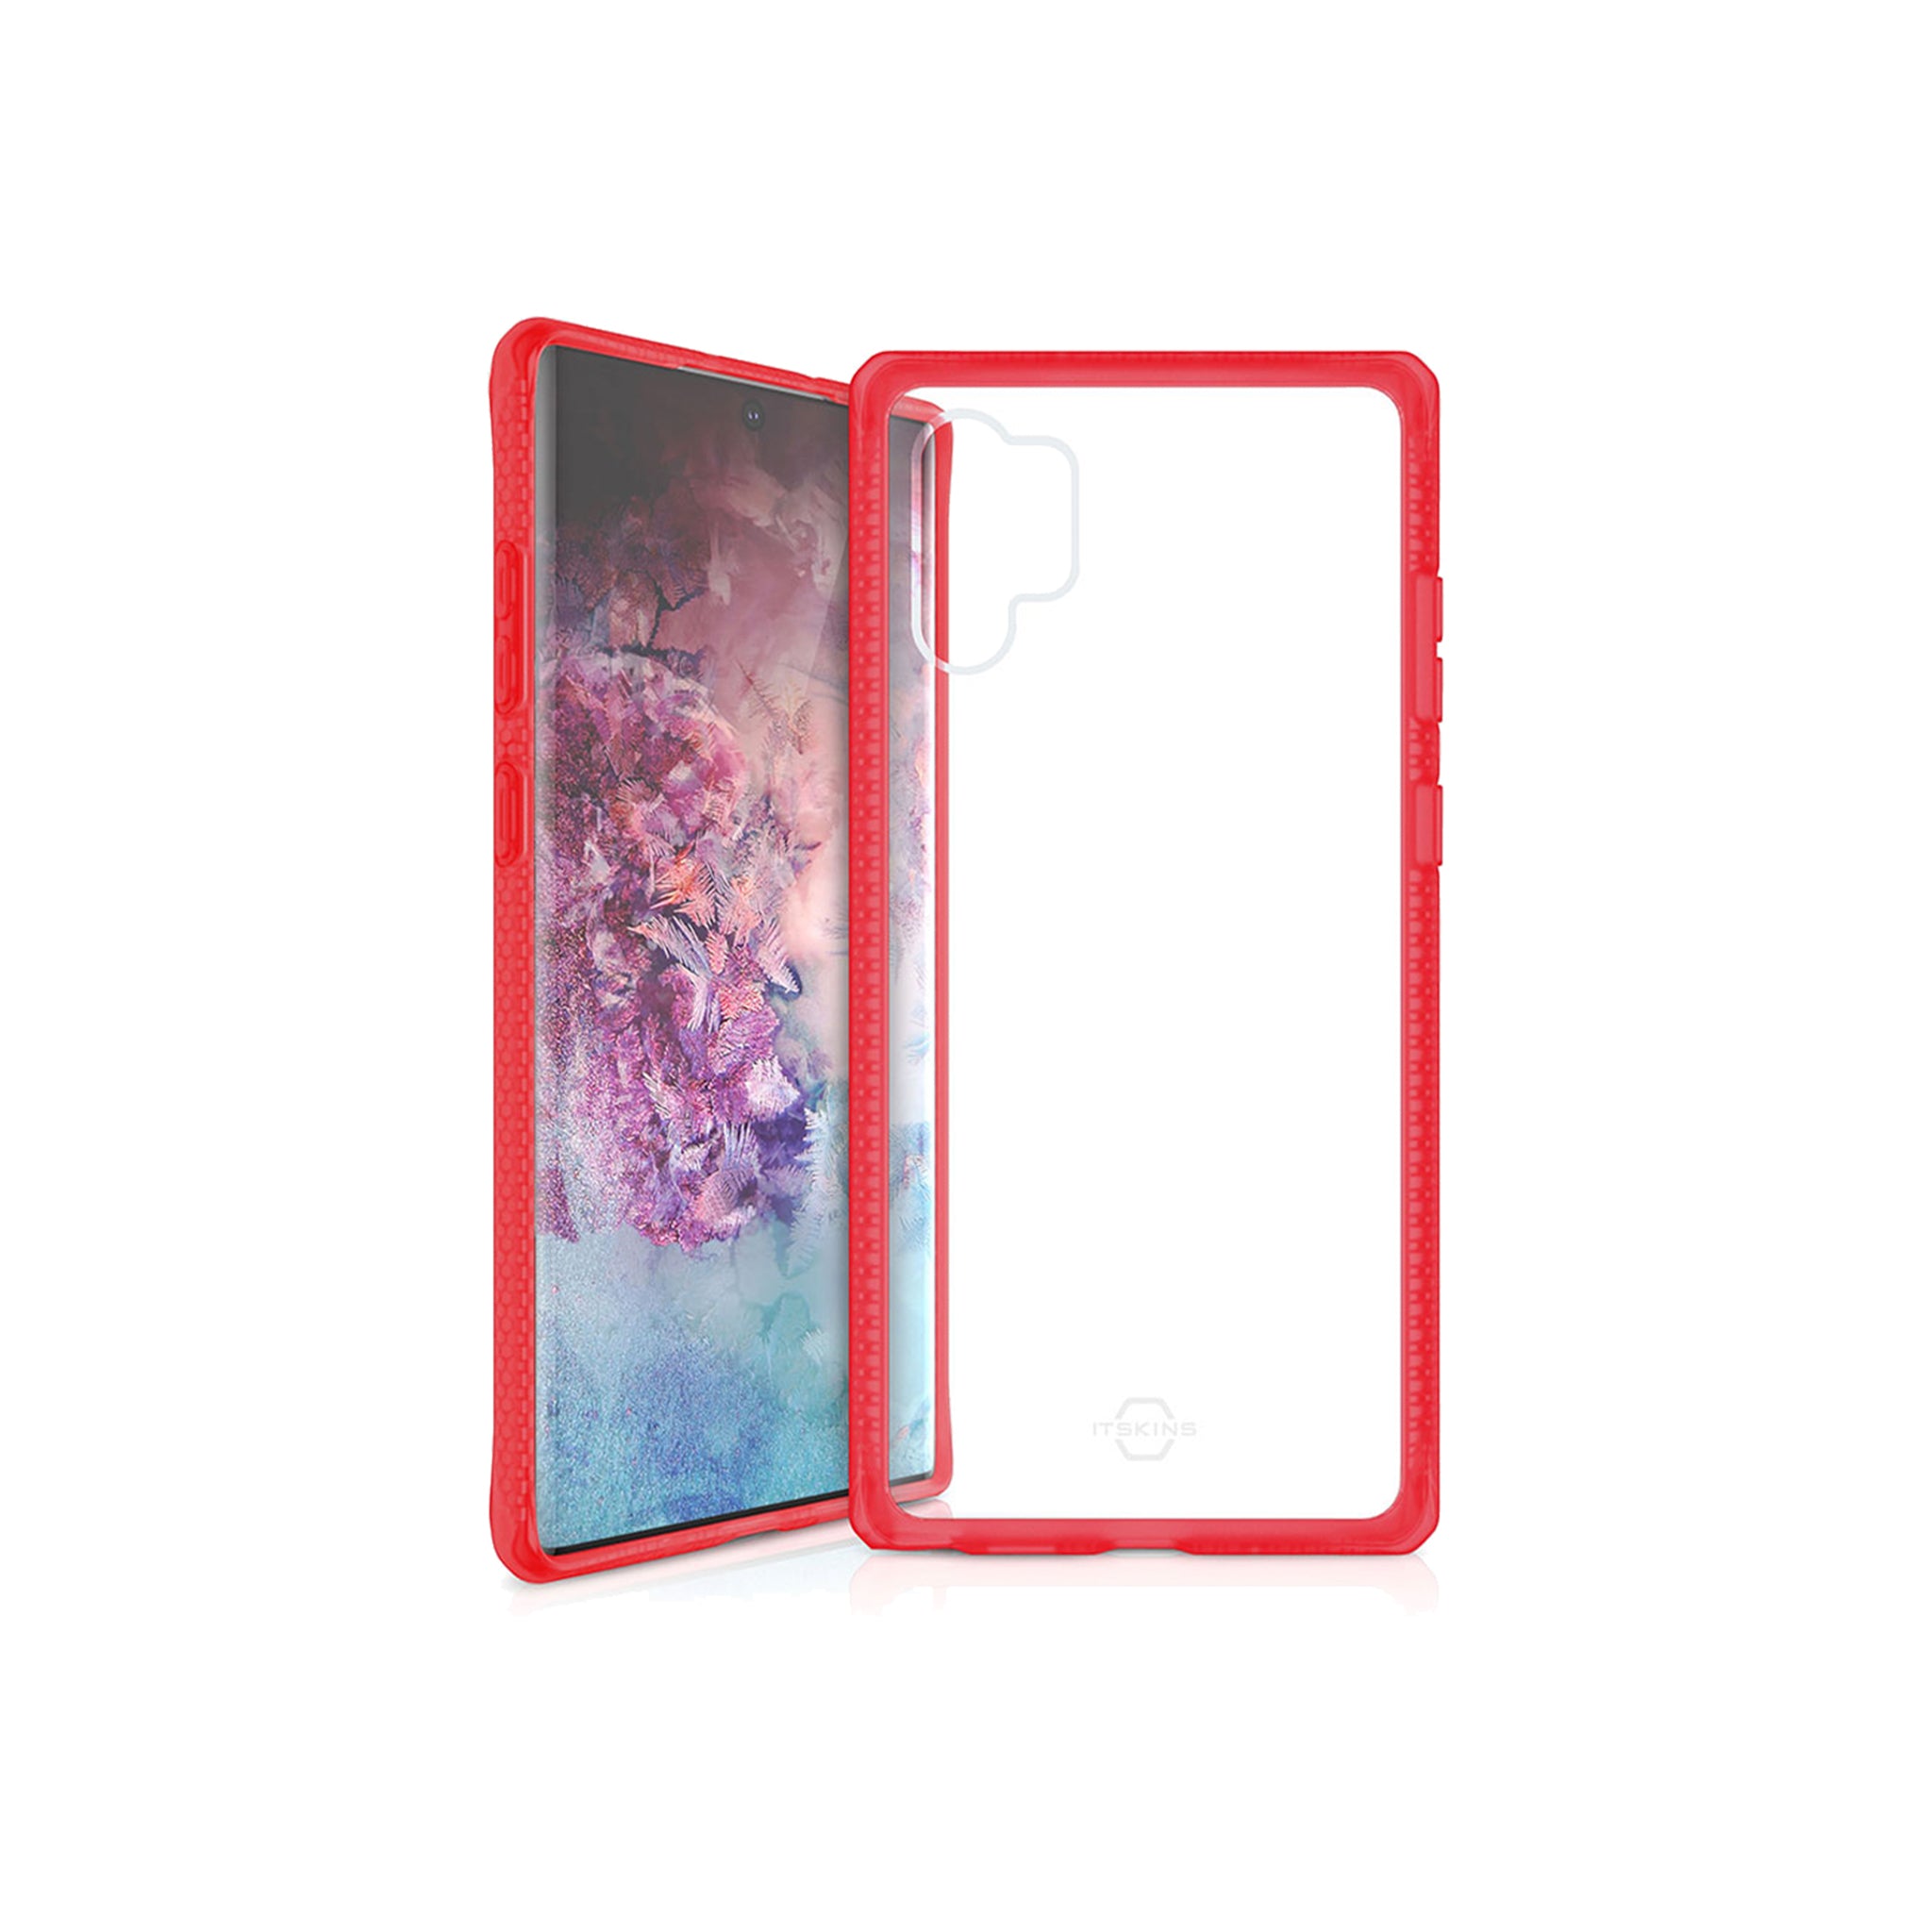 Itskins - Hybrid Frost Mkii Case For Samsung Galaxy Note 10 Plus - Red And Transparent